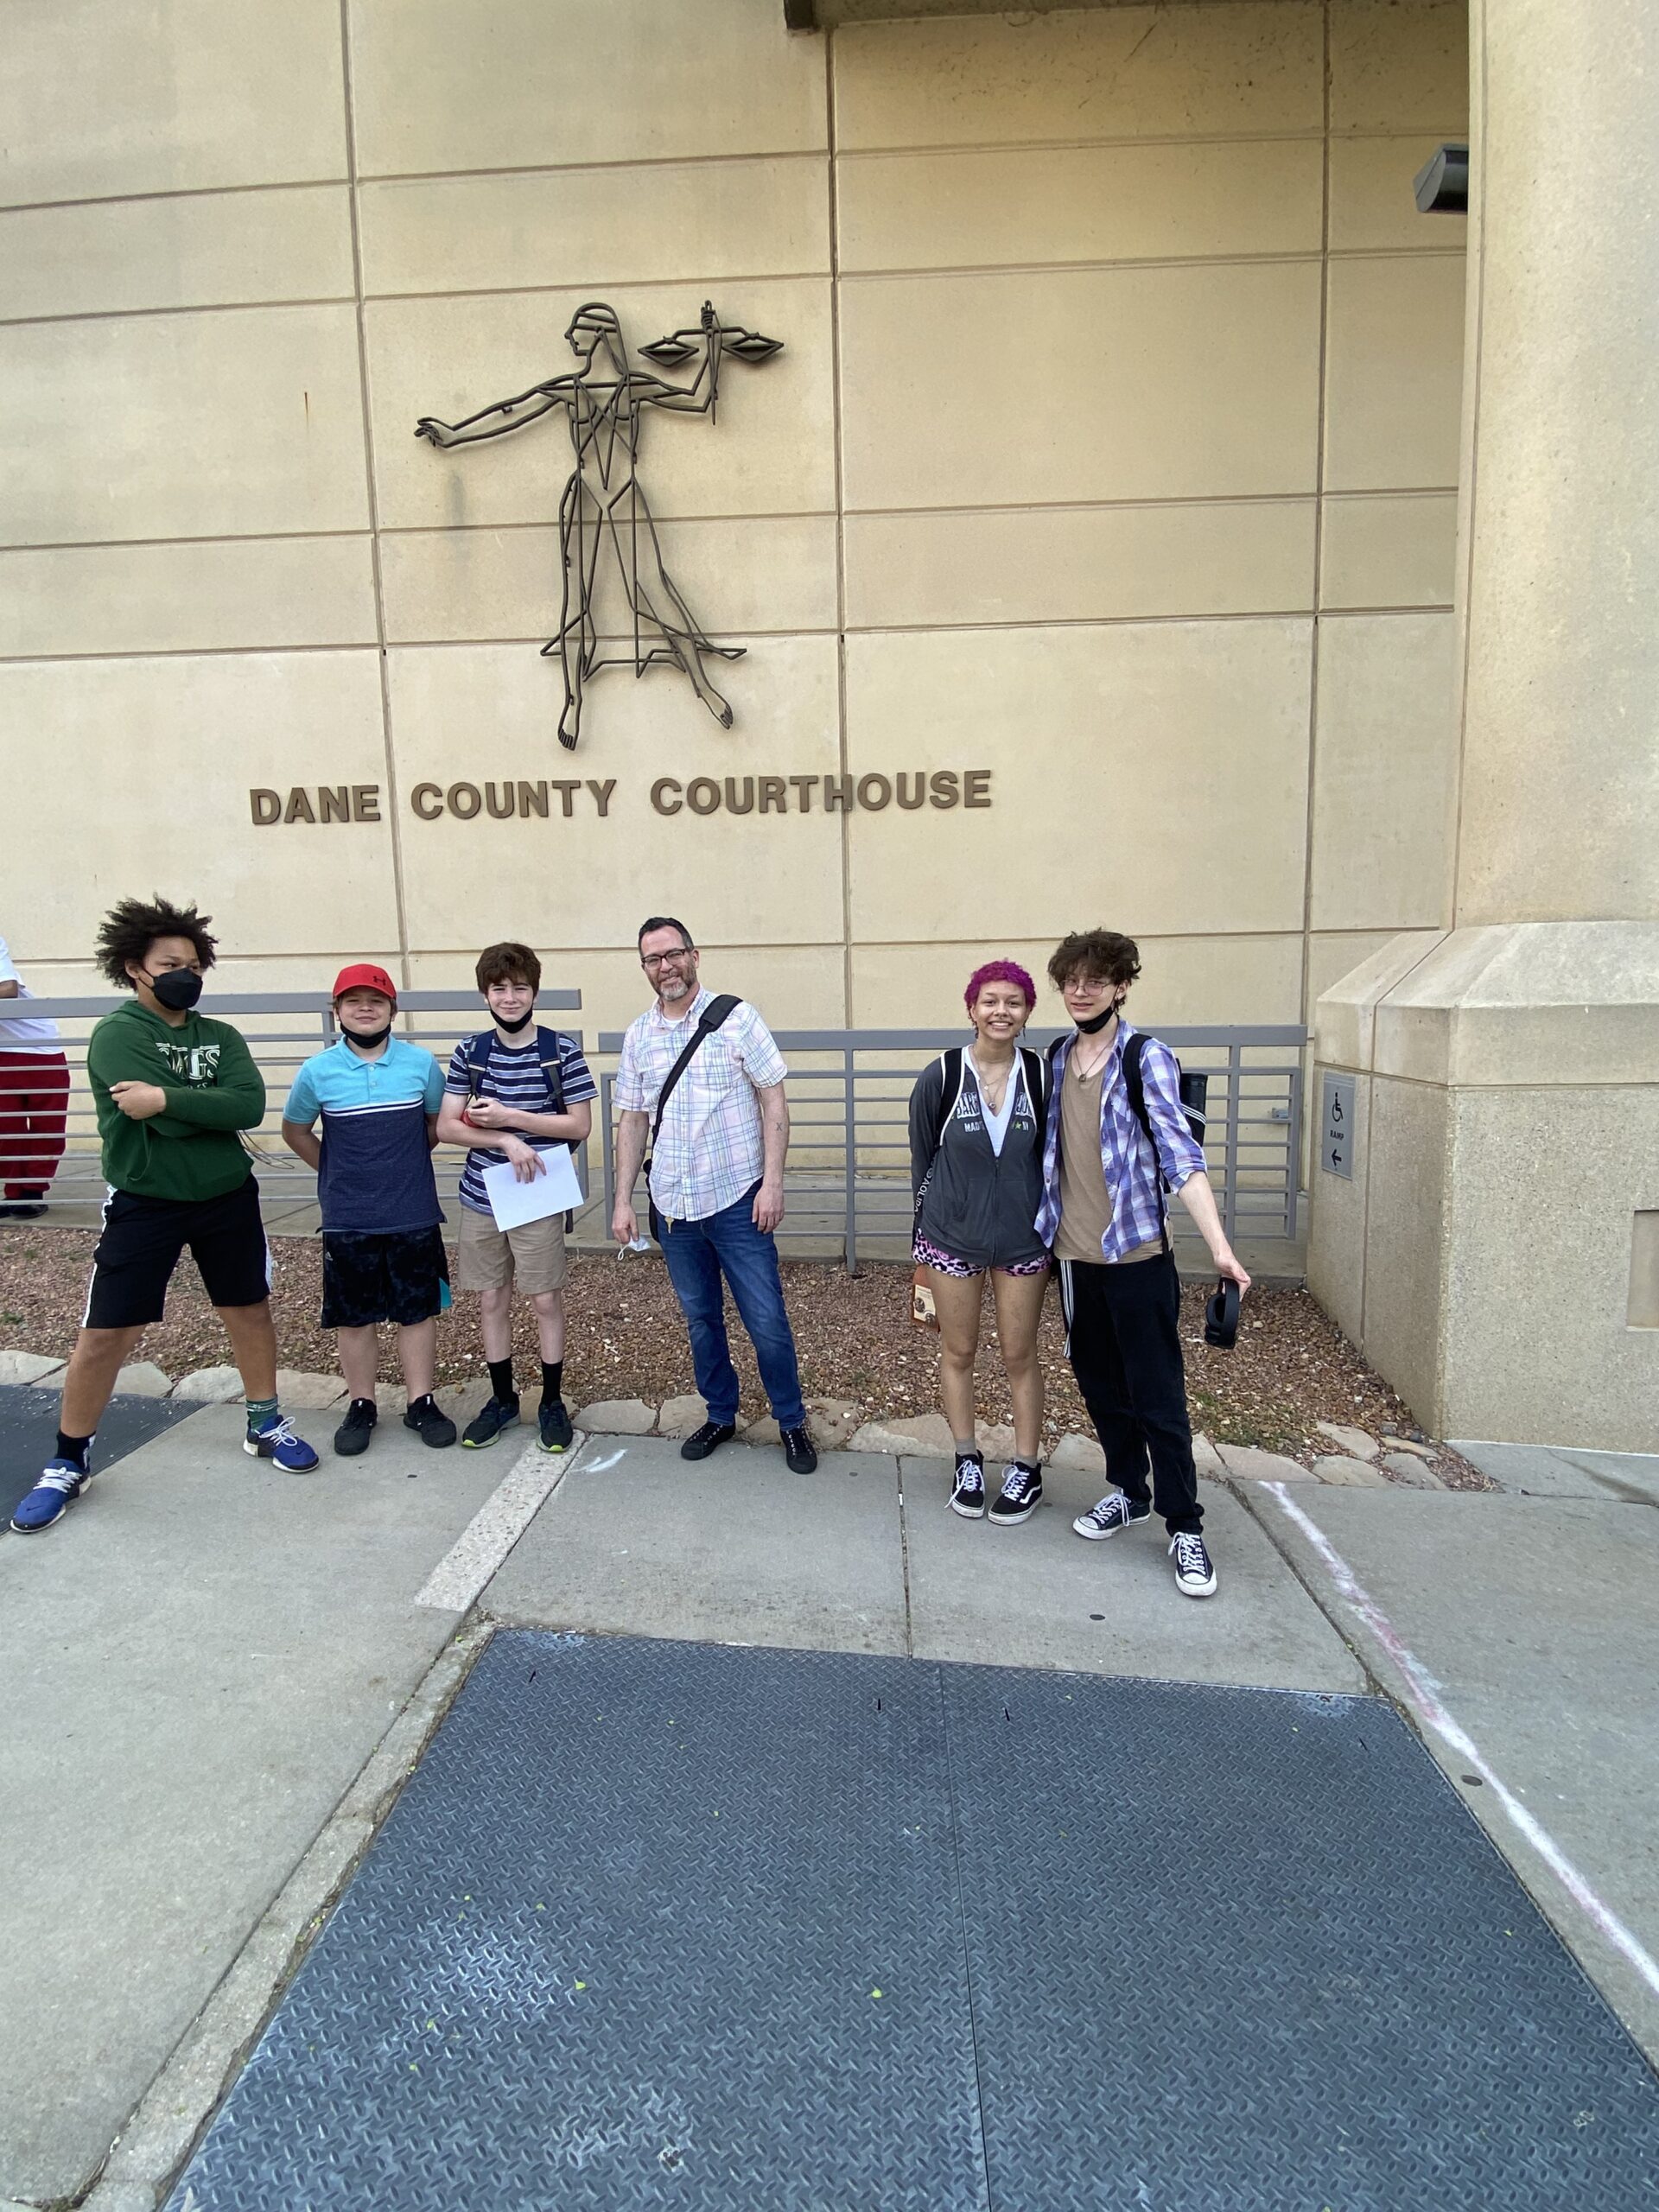 Milestone students and advisor in front of the Dane County courthouse for a student-led outing.